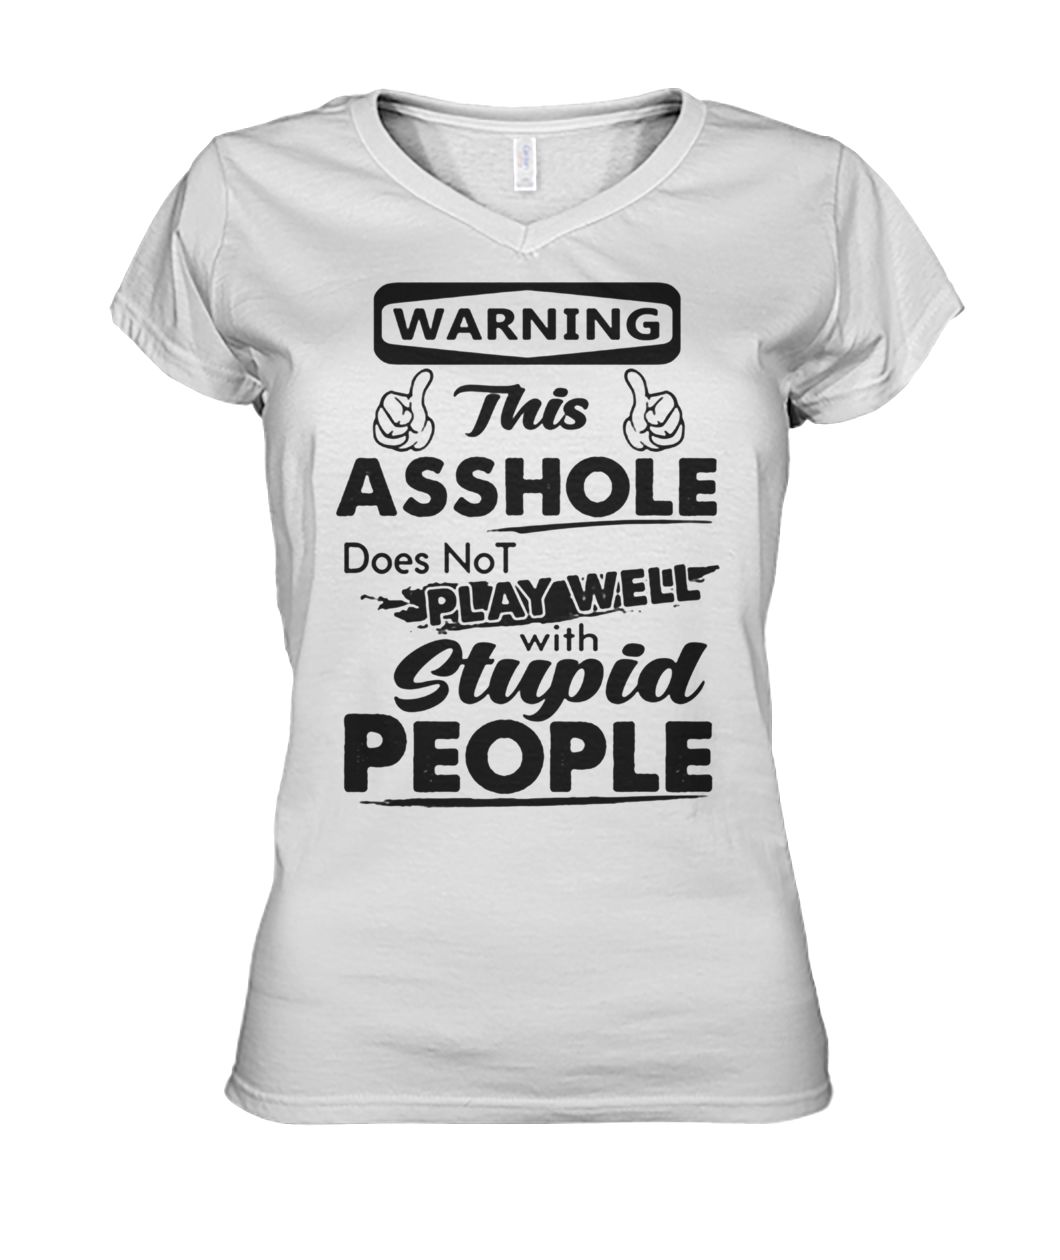 Warning this asshole does not play well with stupid people women's v-neck